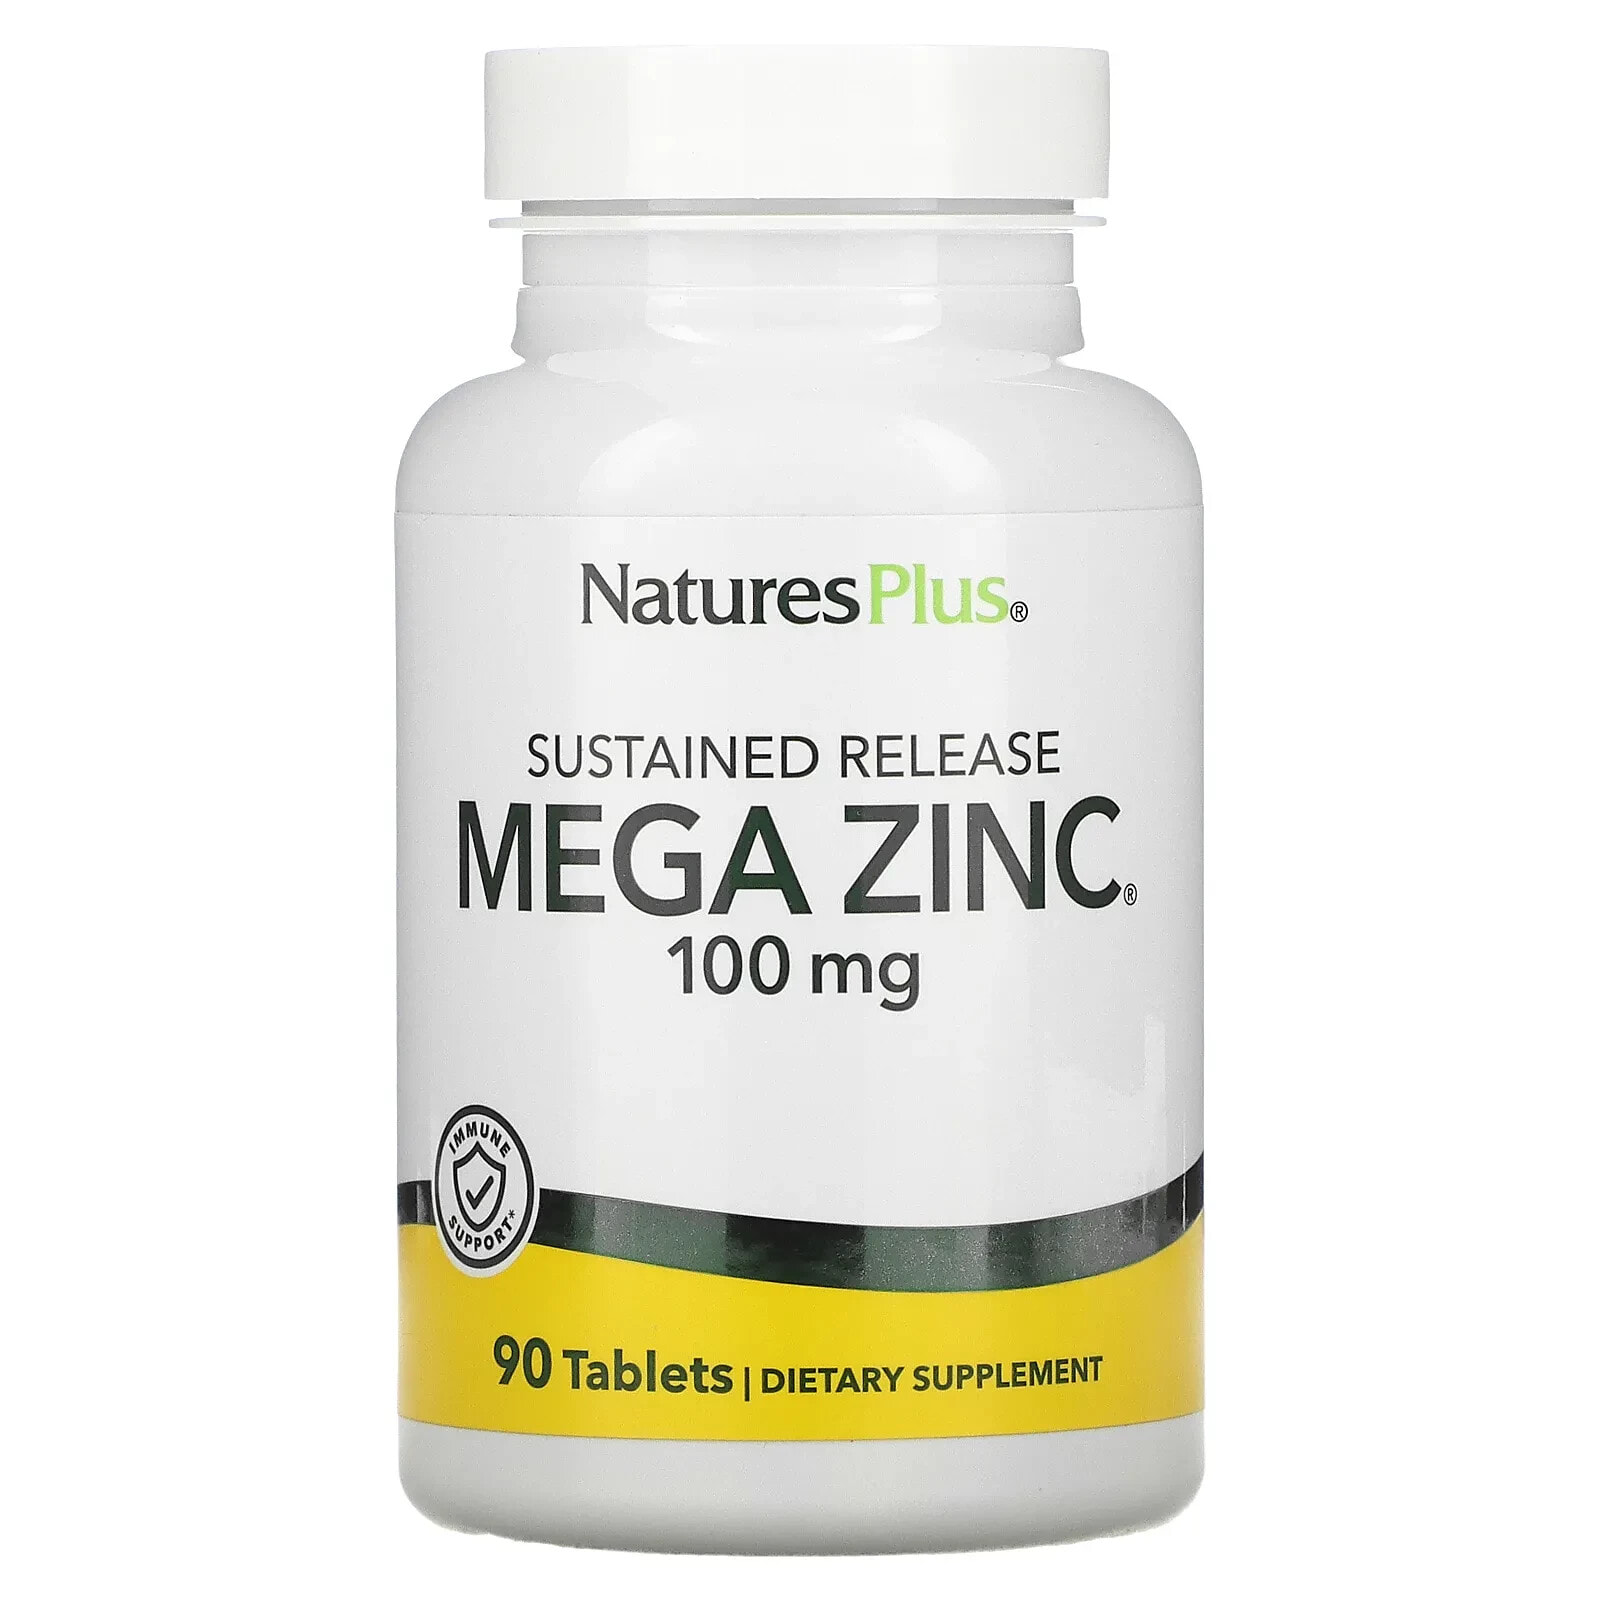 Sustained Release Mega Zinc, 100 mg, 90 Tablets